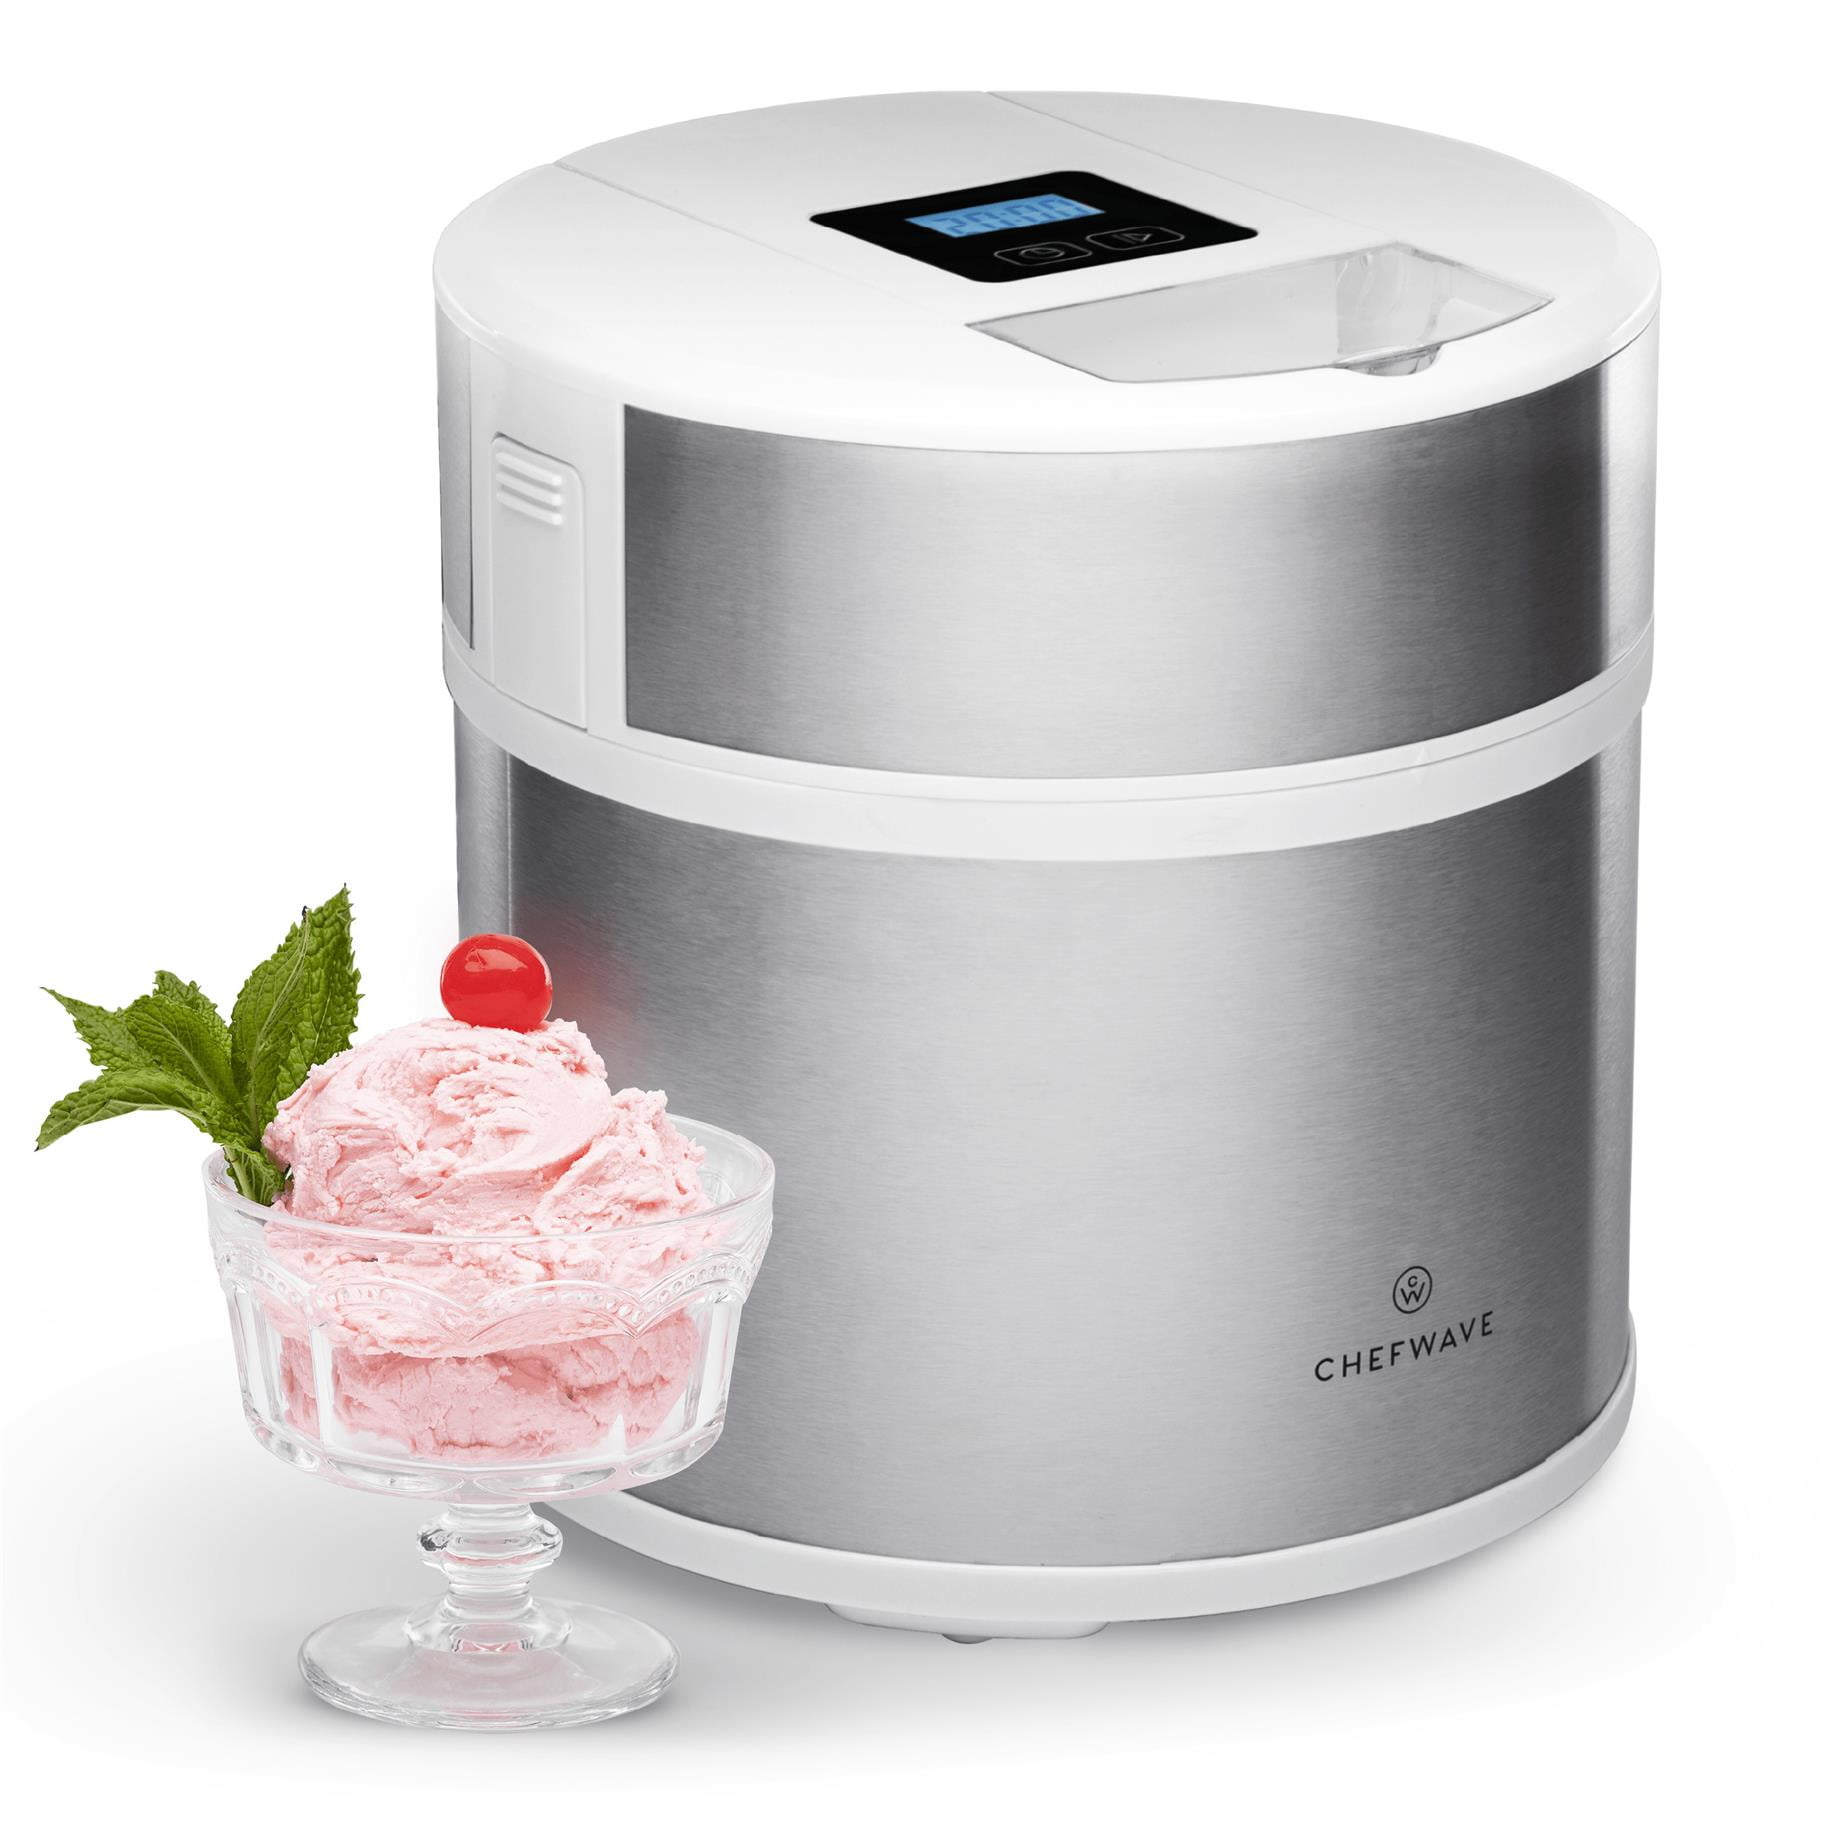 Rise by Dash Personal Electric Ice Cream Maker for Gelato, Sorbet + Frozen  Yogurt (Healthy Snacks + Dessert for Kids & Adults) - 1 Pint - Red - 2.6